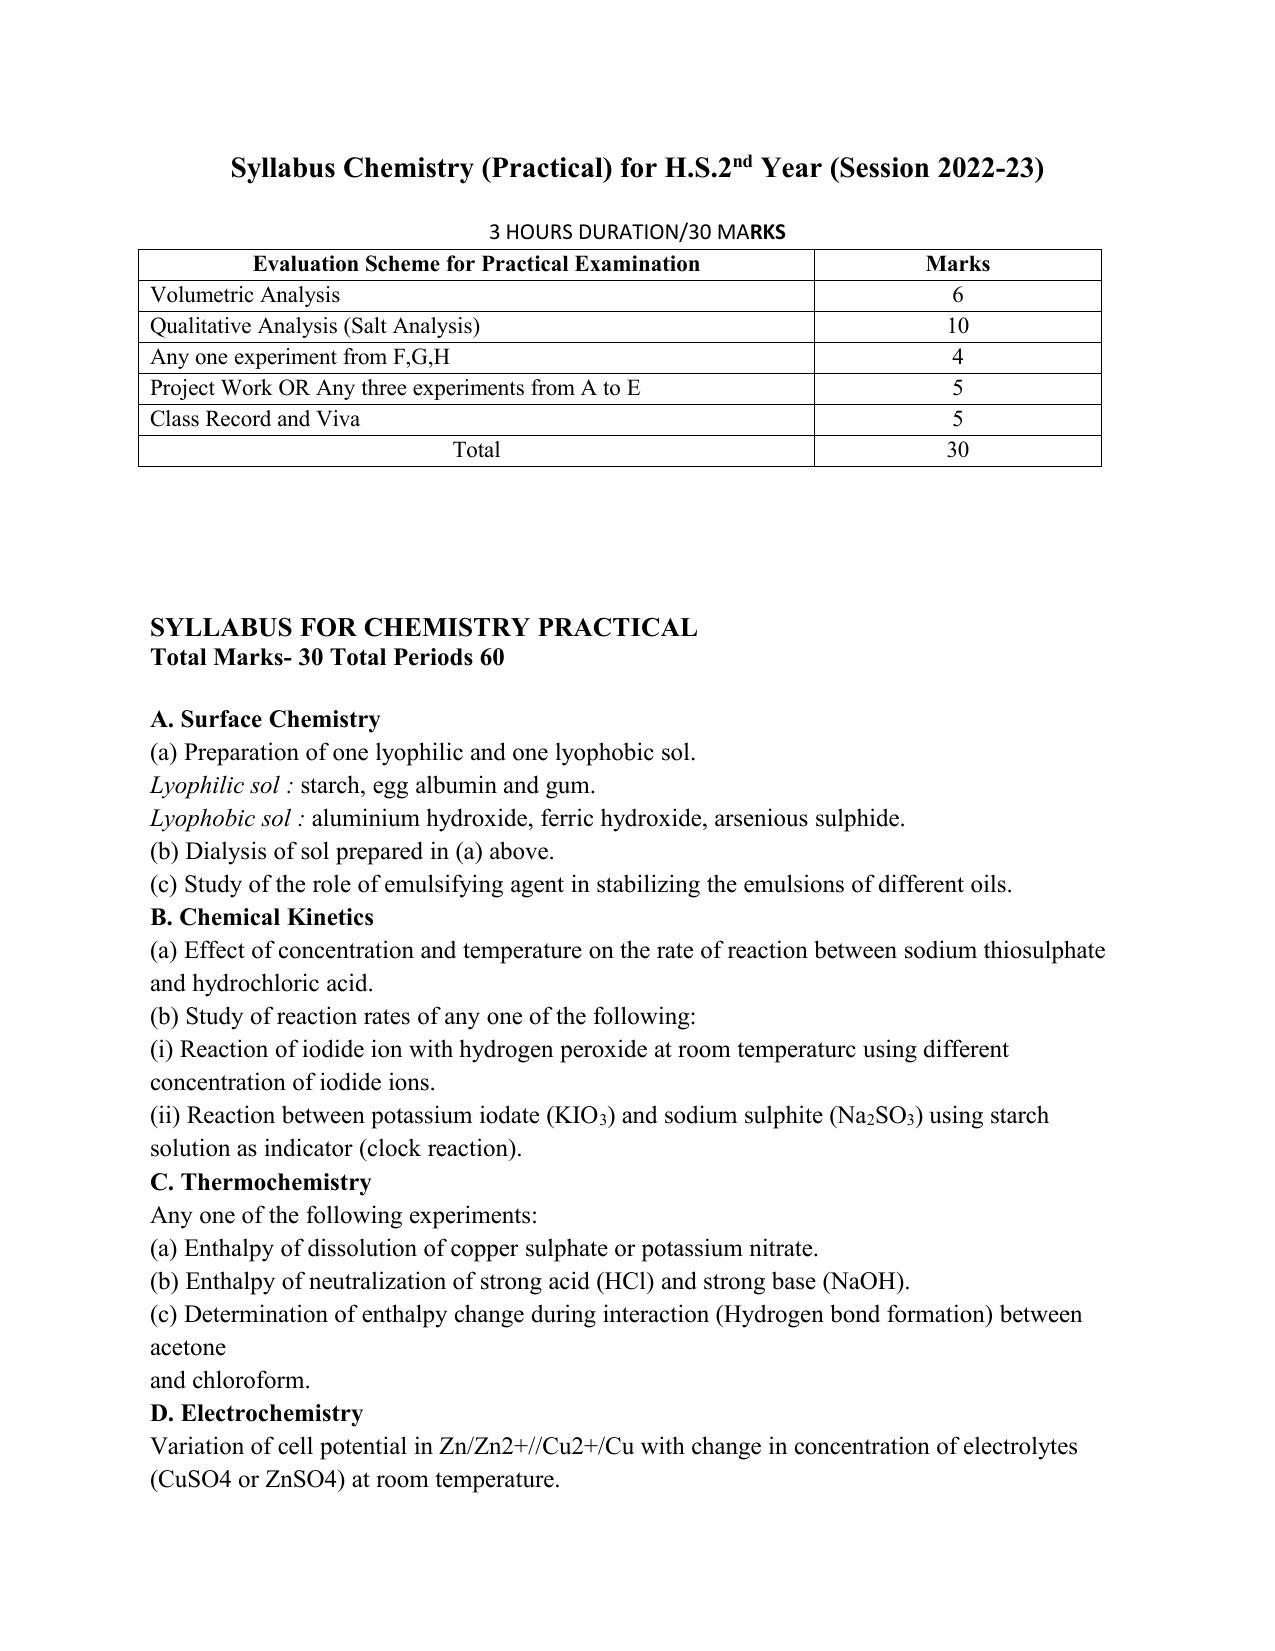 AHSEC 2nd Year Chemistry Syllabus - Page 7